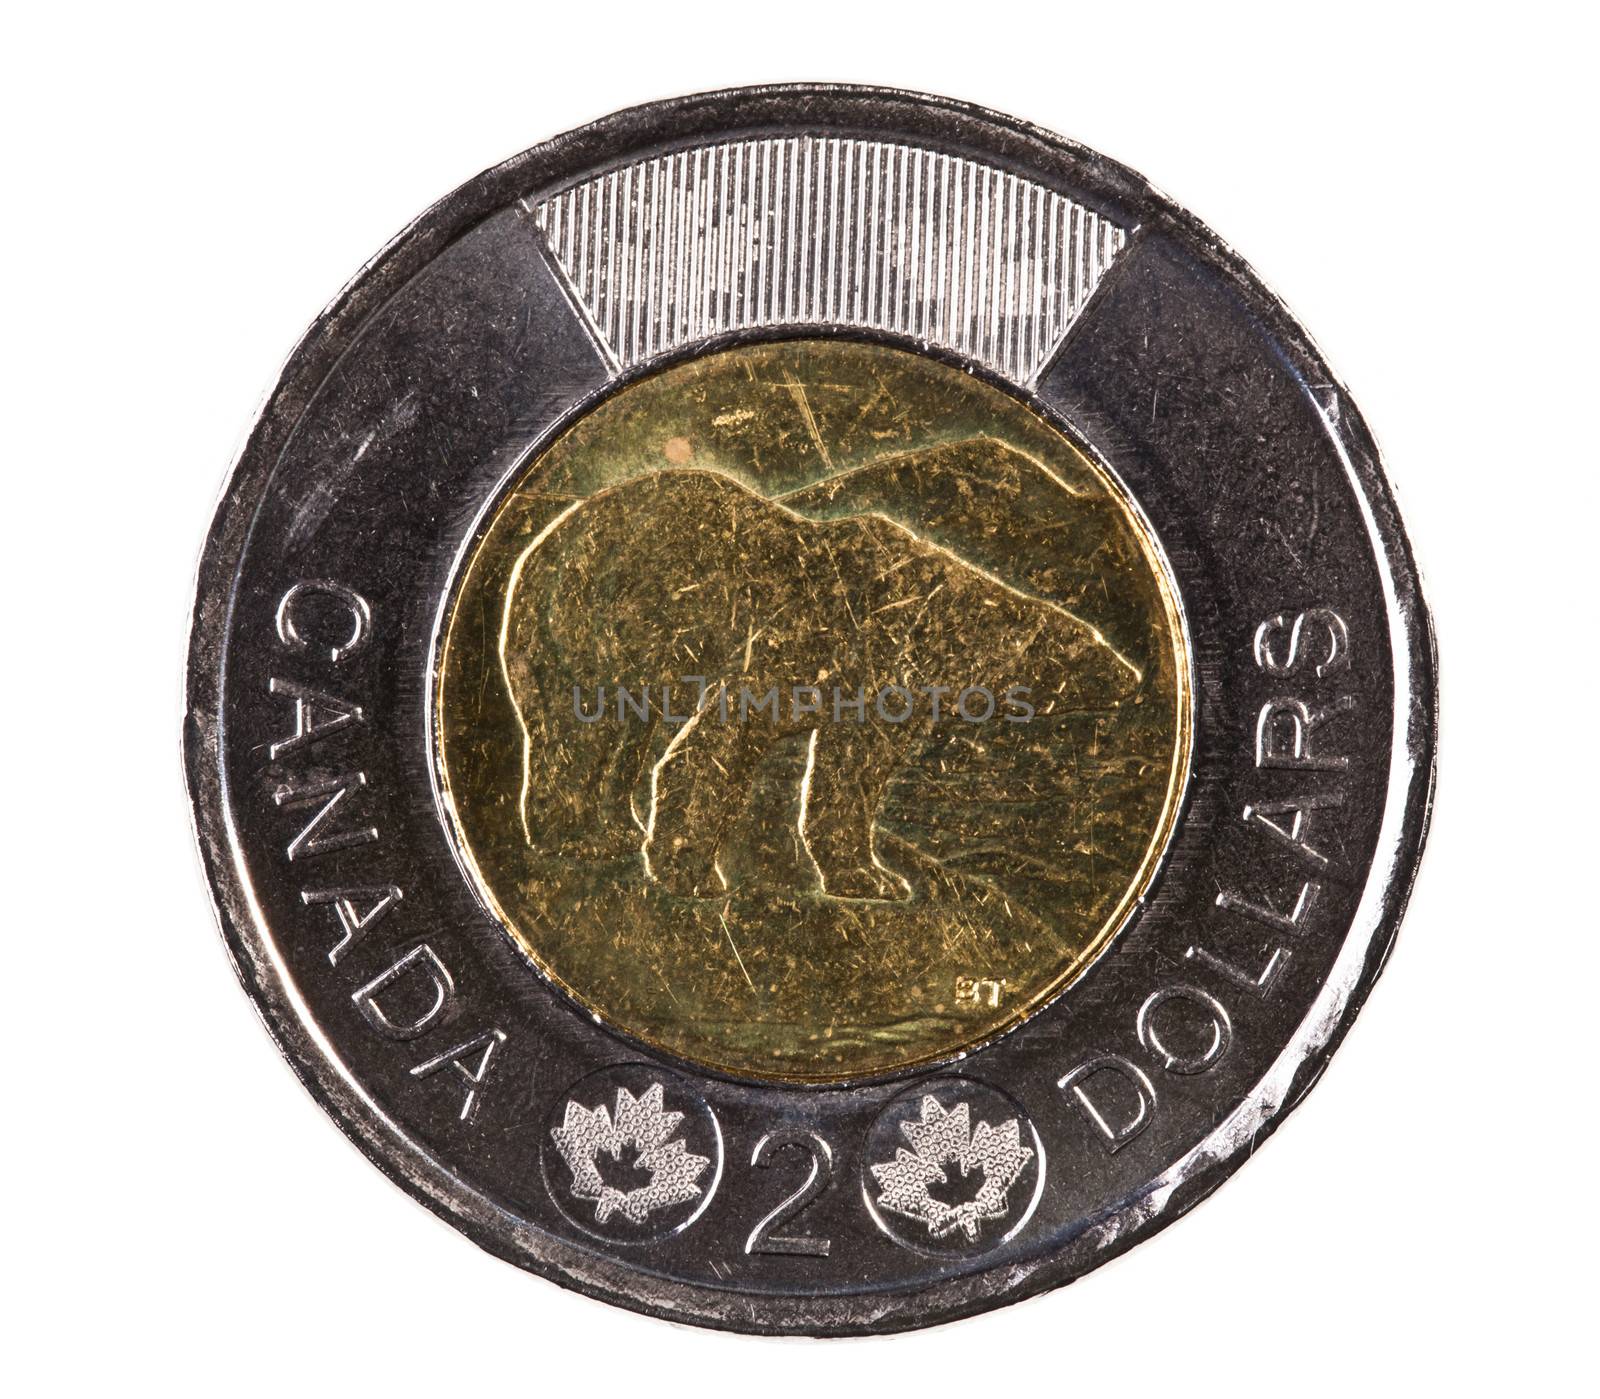 Ottawa, Canada, Avril 13, 2013,  A brand new shiny 2012 Canadian two dollars by aetb